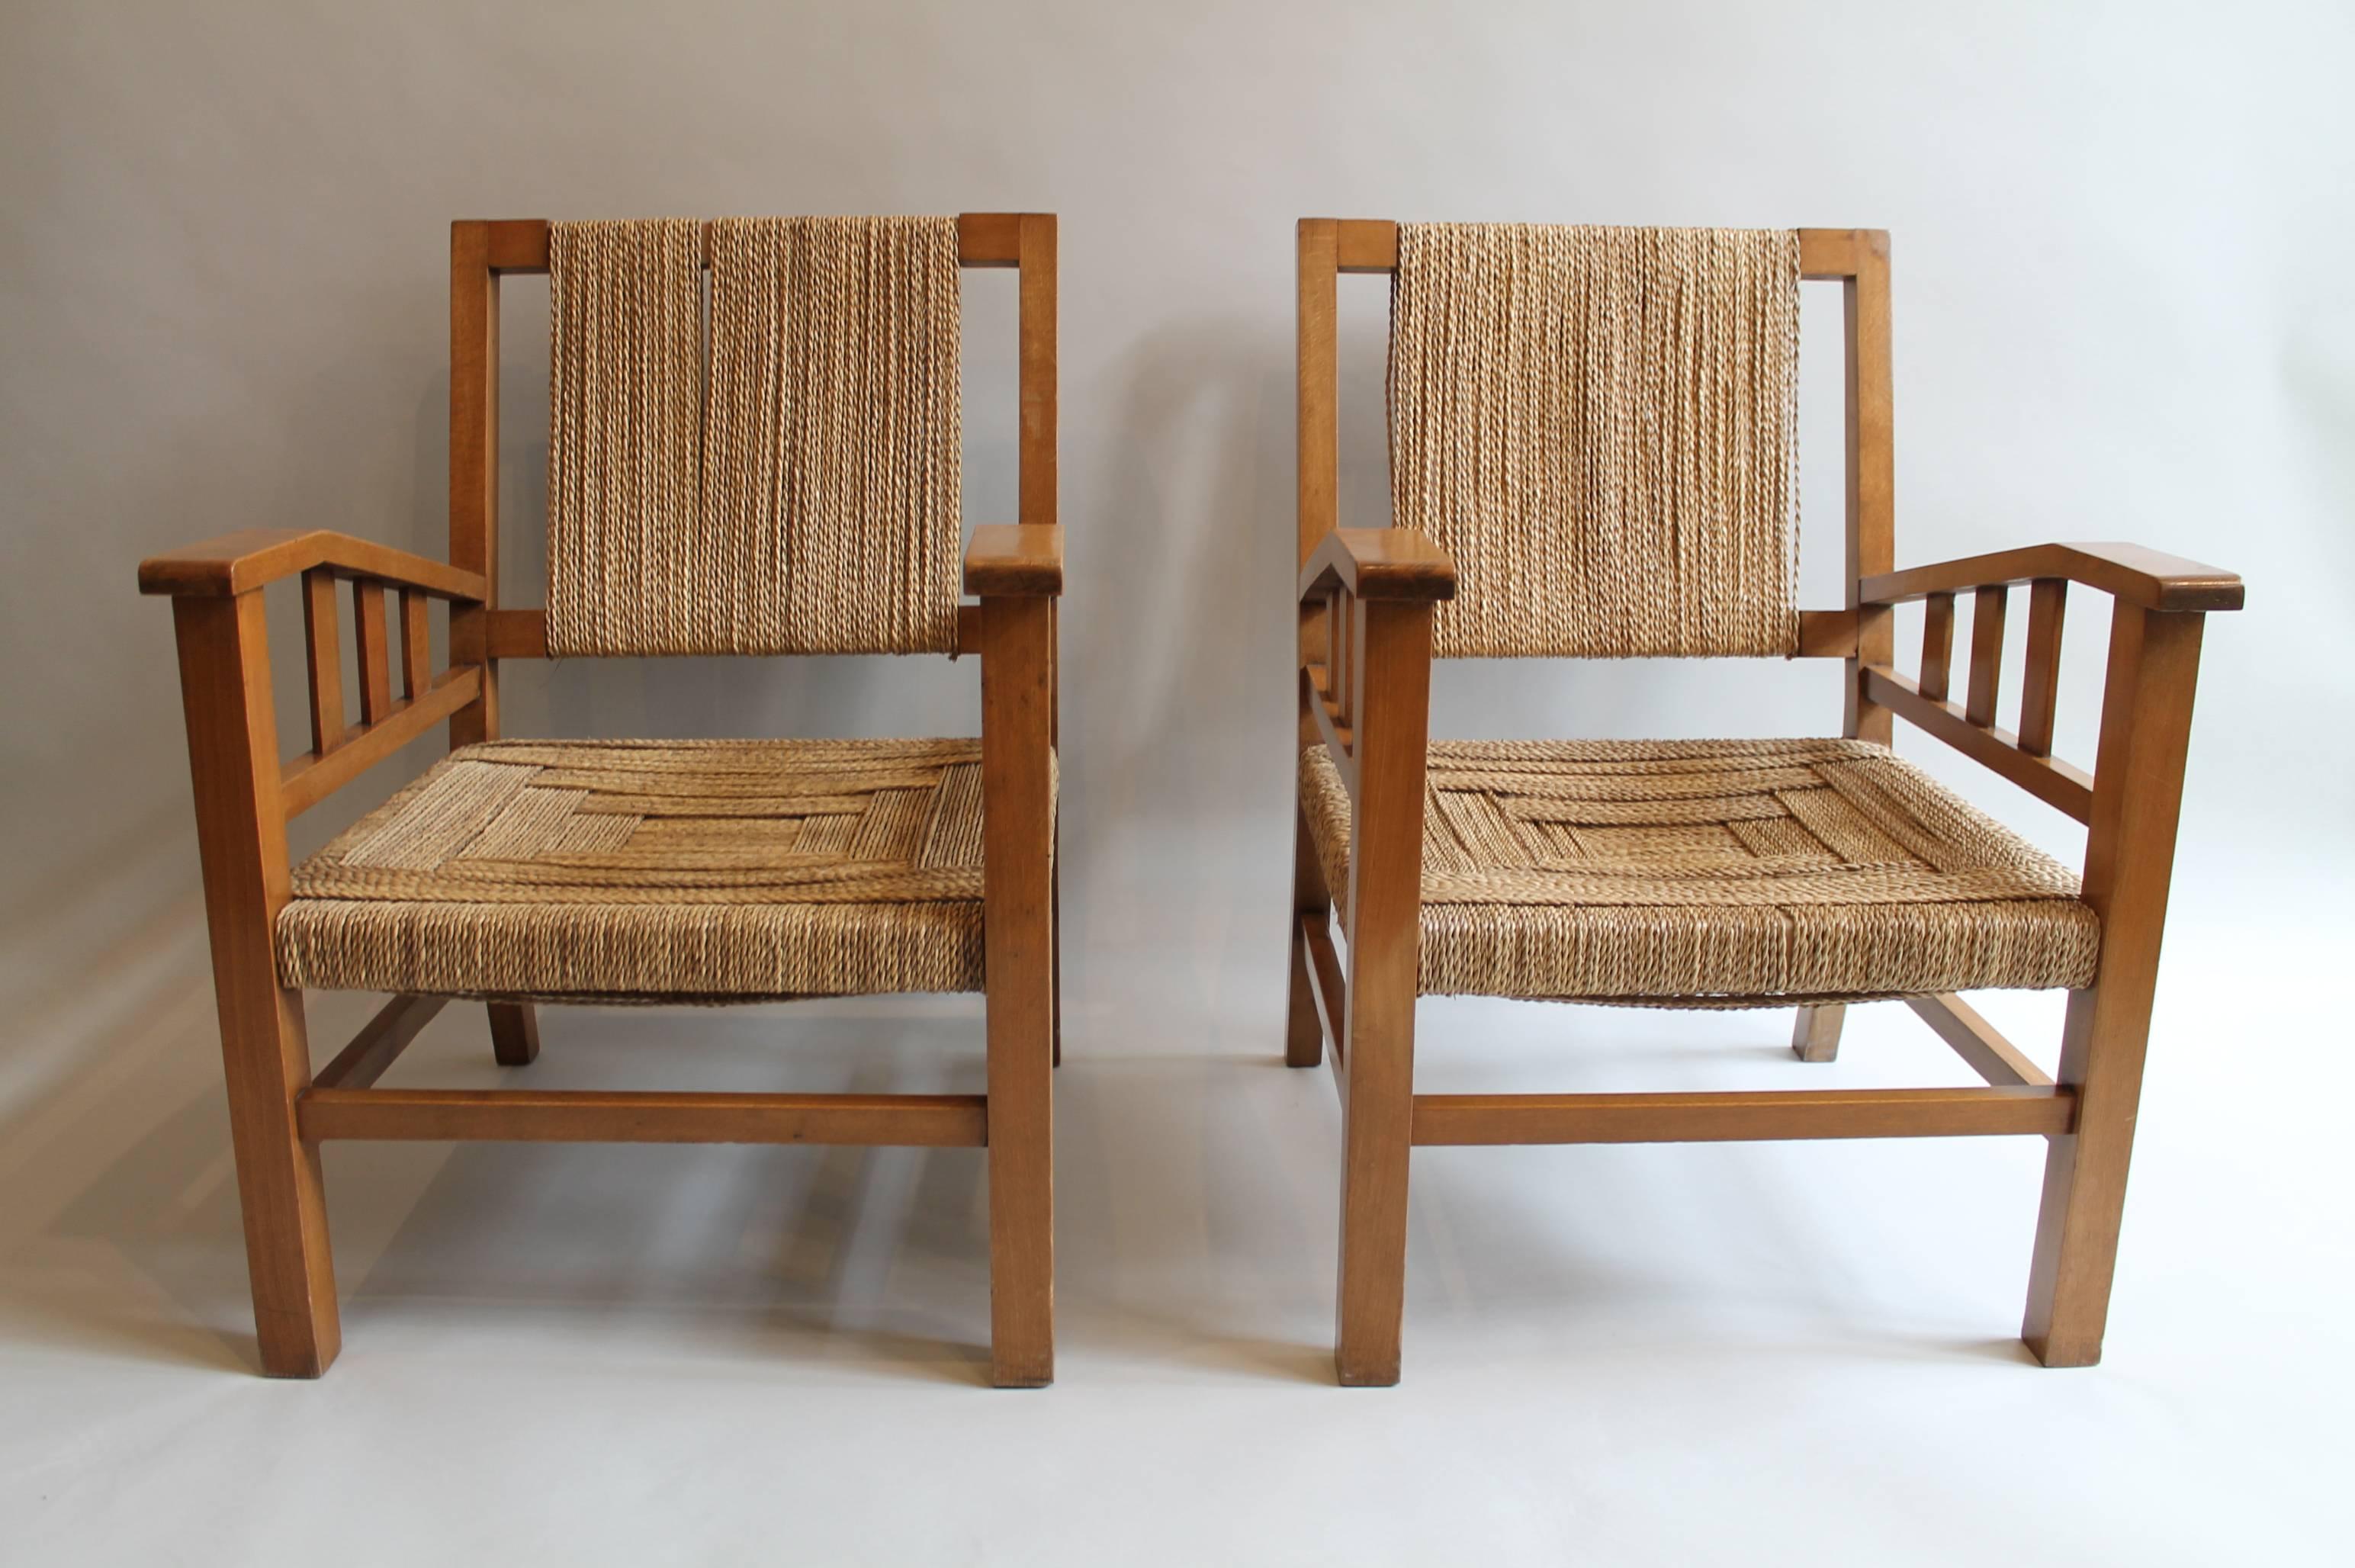 The wood frames with the seats and backs strung with twisted seagrass.